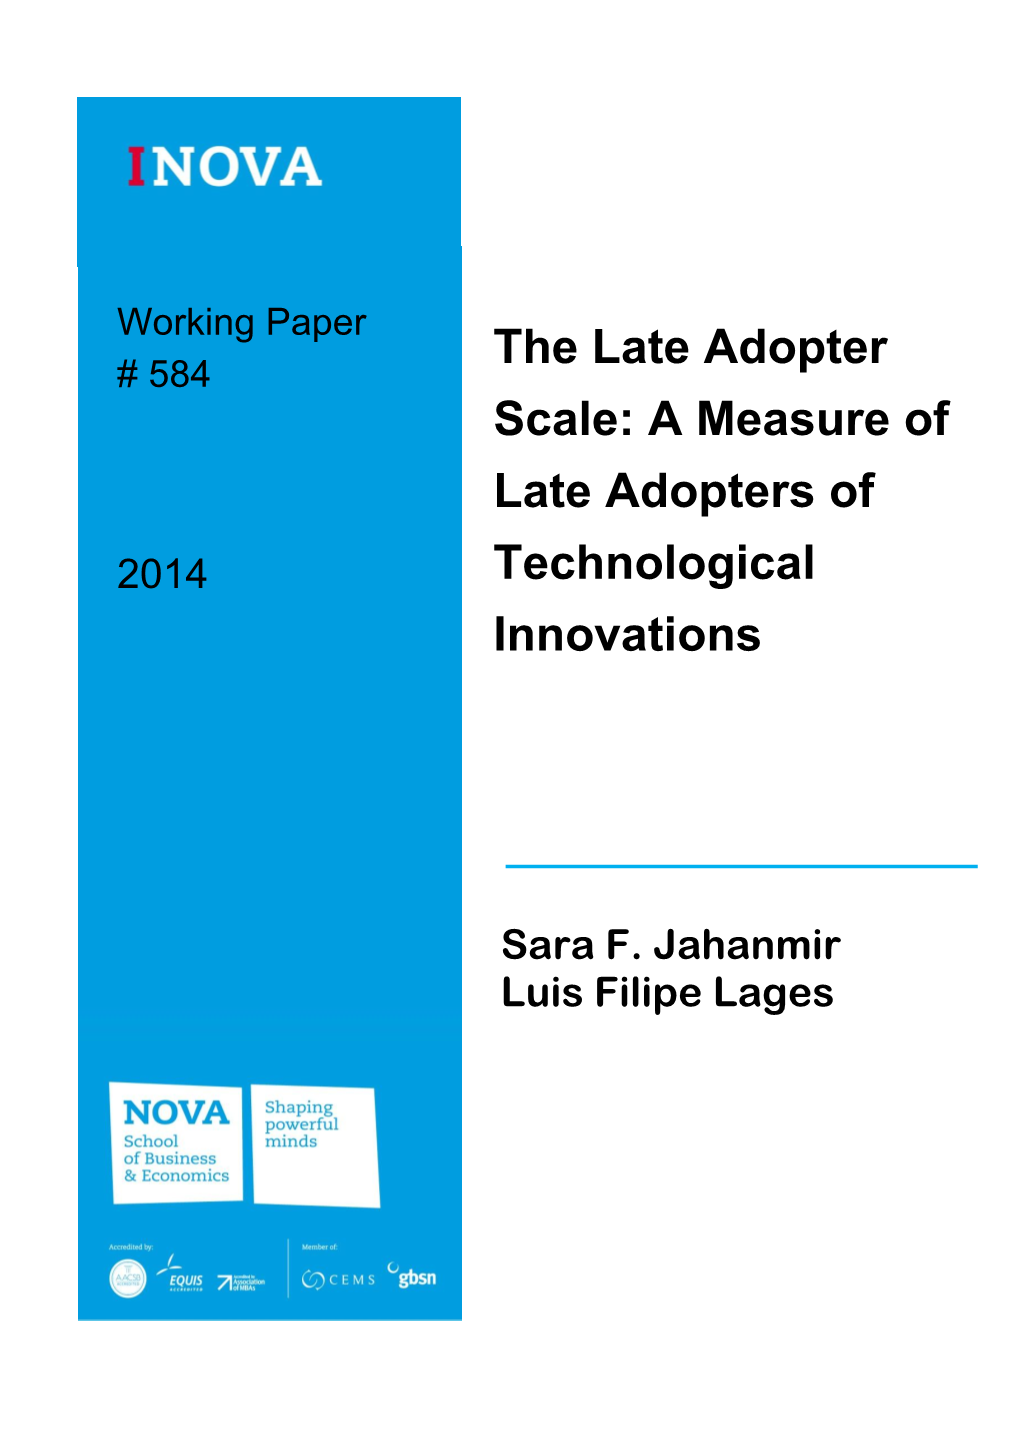 A Measure of Late Adopters of Technological Innovations